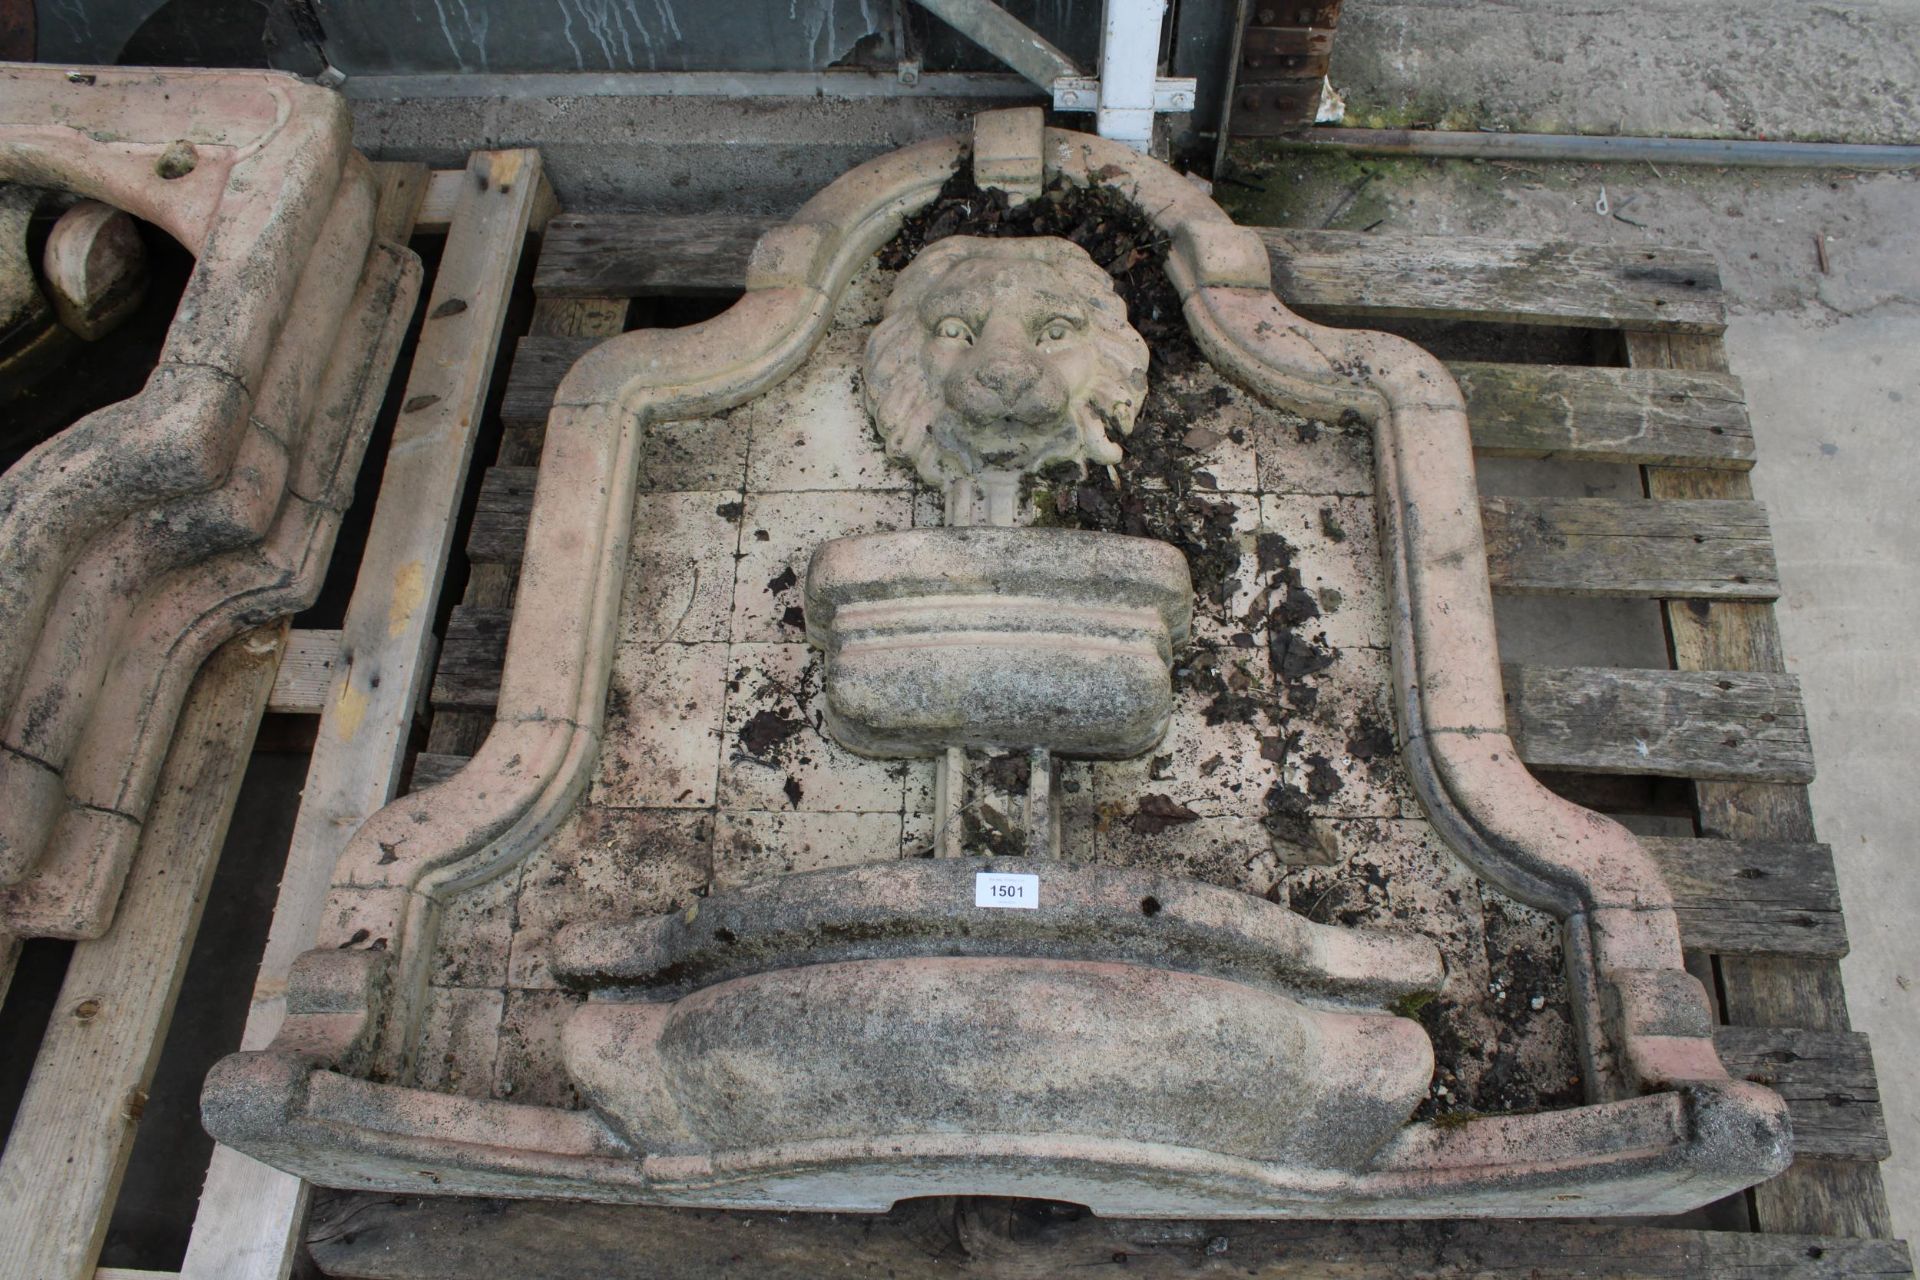 AN EXTREMELY LARGE AND HEAVY RECONSTITUTED STONE WATER FEATURE WITH LION HEAD DETAIL - Image 2 of 4